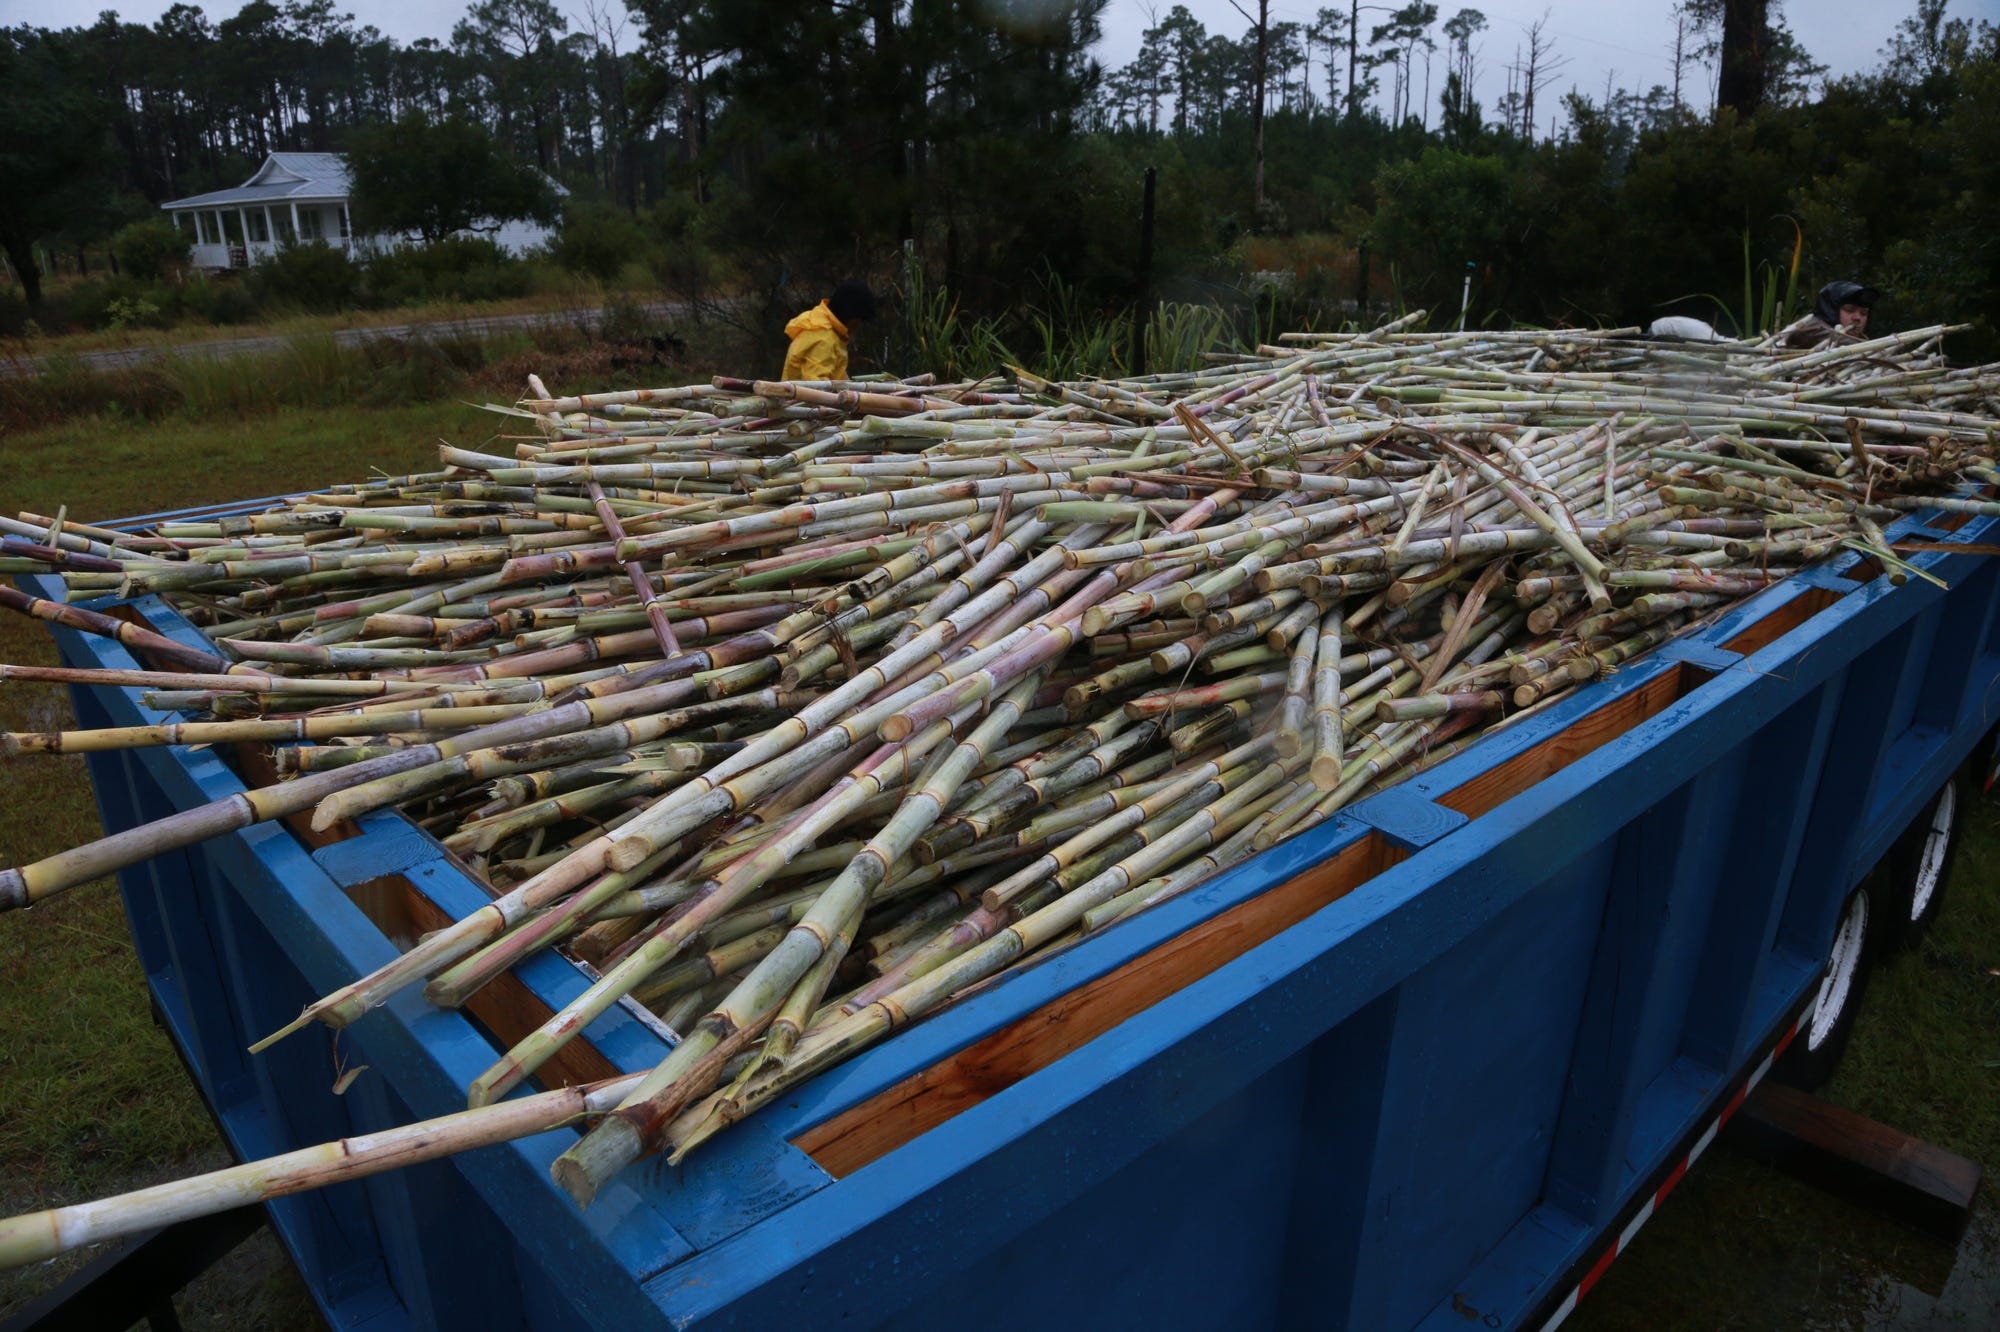 A trailer is loaded with harvested sugar cane to get ready to be put on the barge for transport off Sapelo Island.